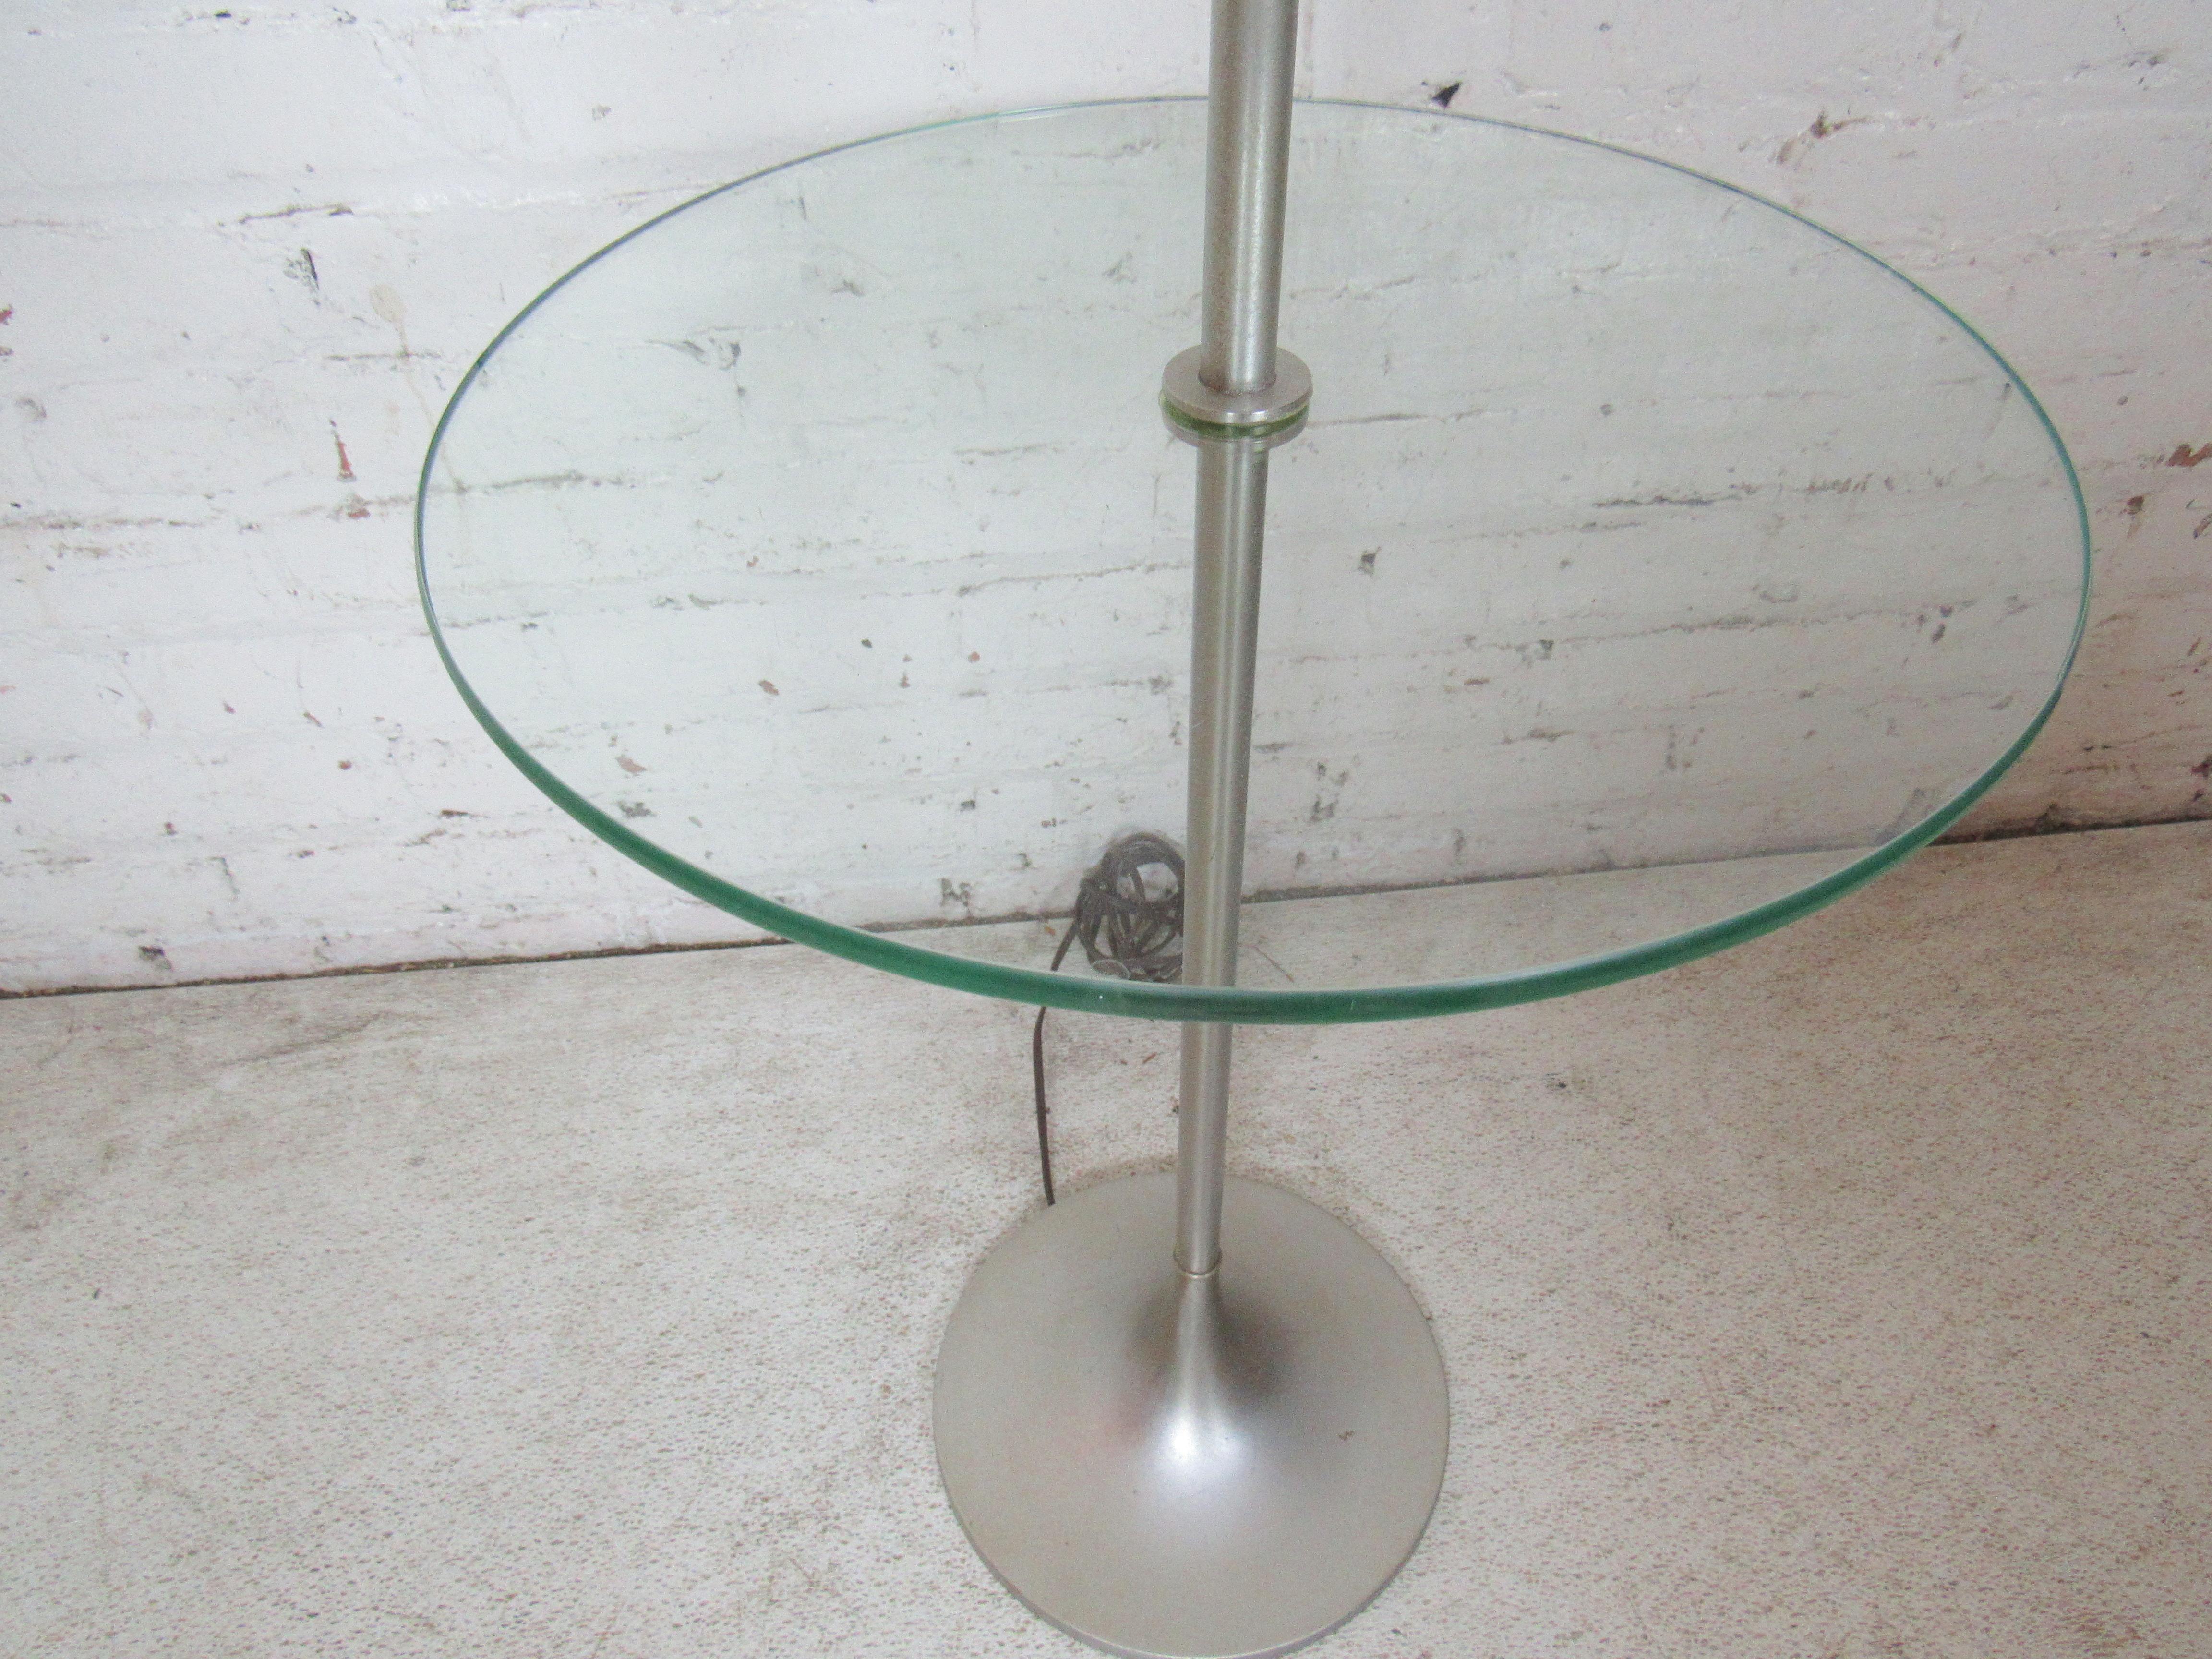 Modern style lamp with metal base and round glass shelf.
(Please confirm item location - NY or NJ - with dealer).
 